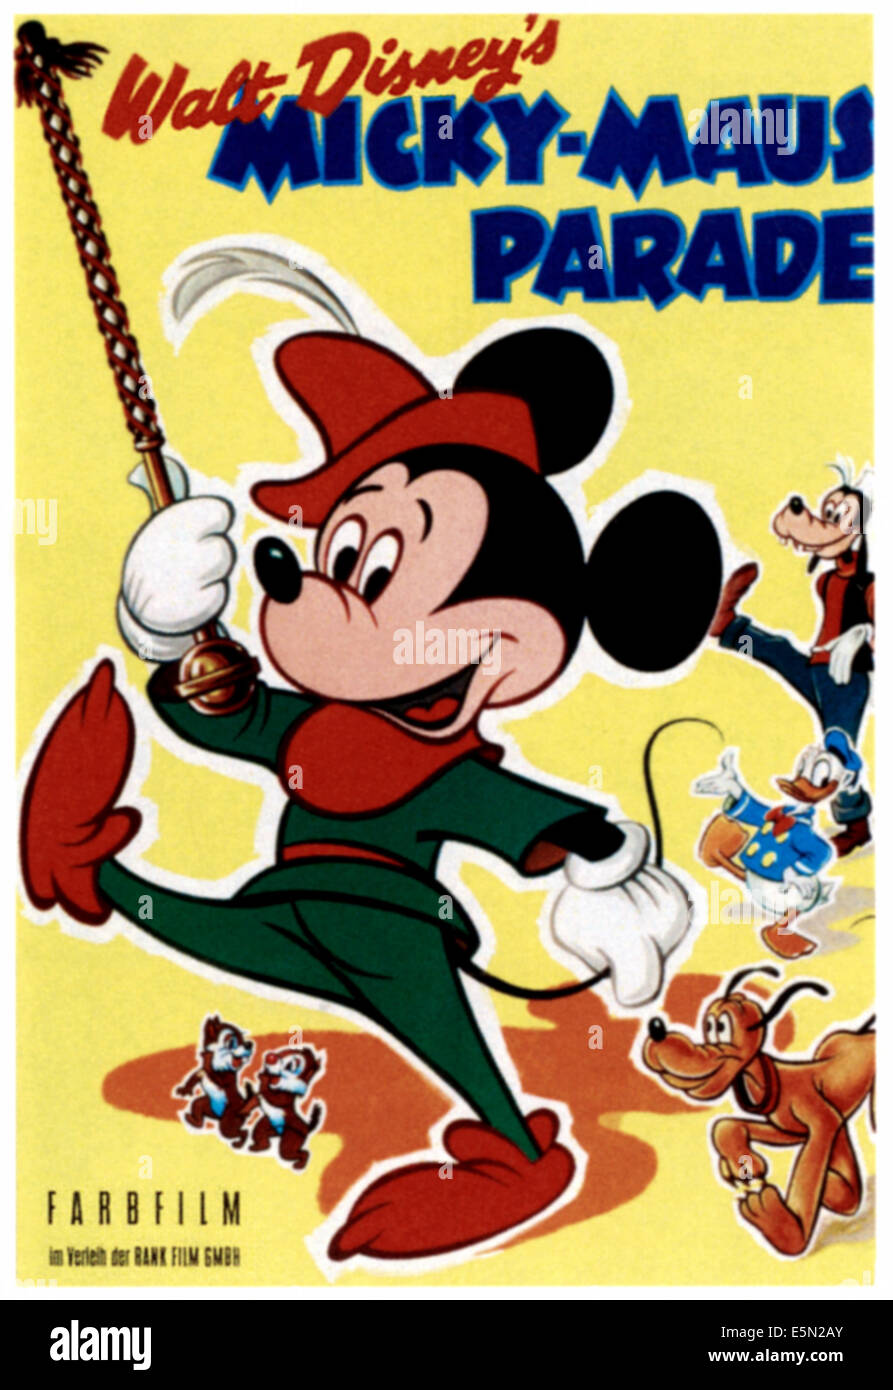 MICKEY MOUSE ON PARADE (aka MICKY-MAUS PARADE), from left: Mickey Mouse, Donald Duck, Goofy, bottom from left: Chip, Dale, Stock Photo